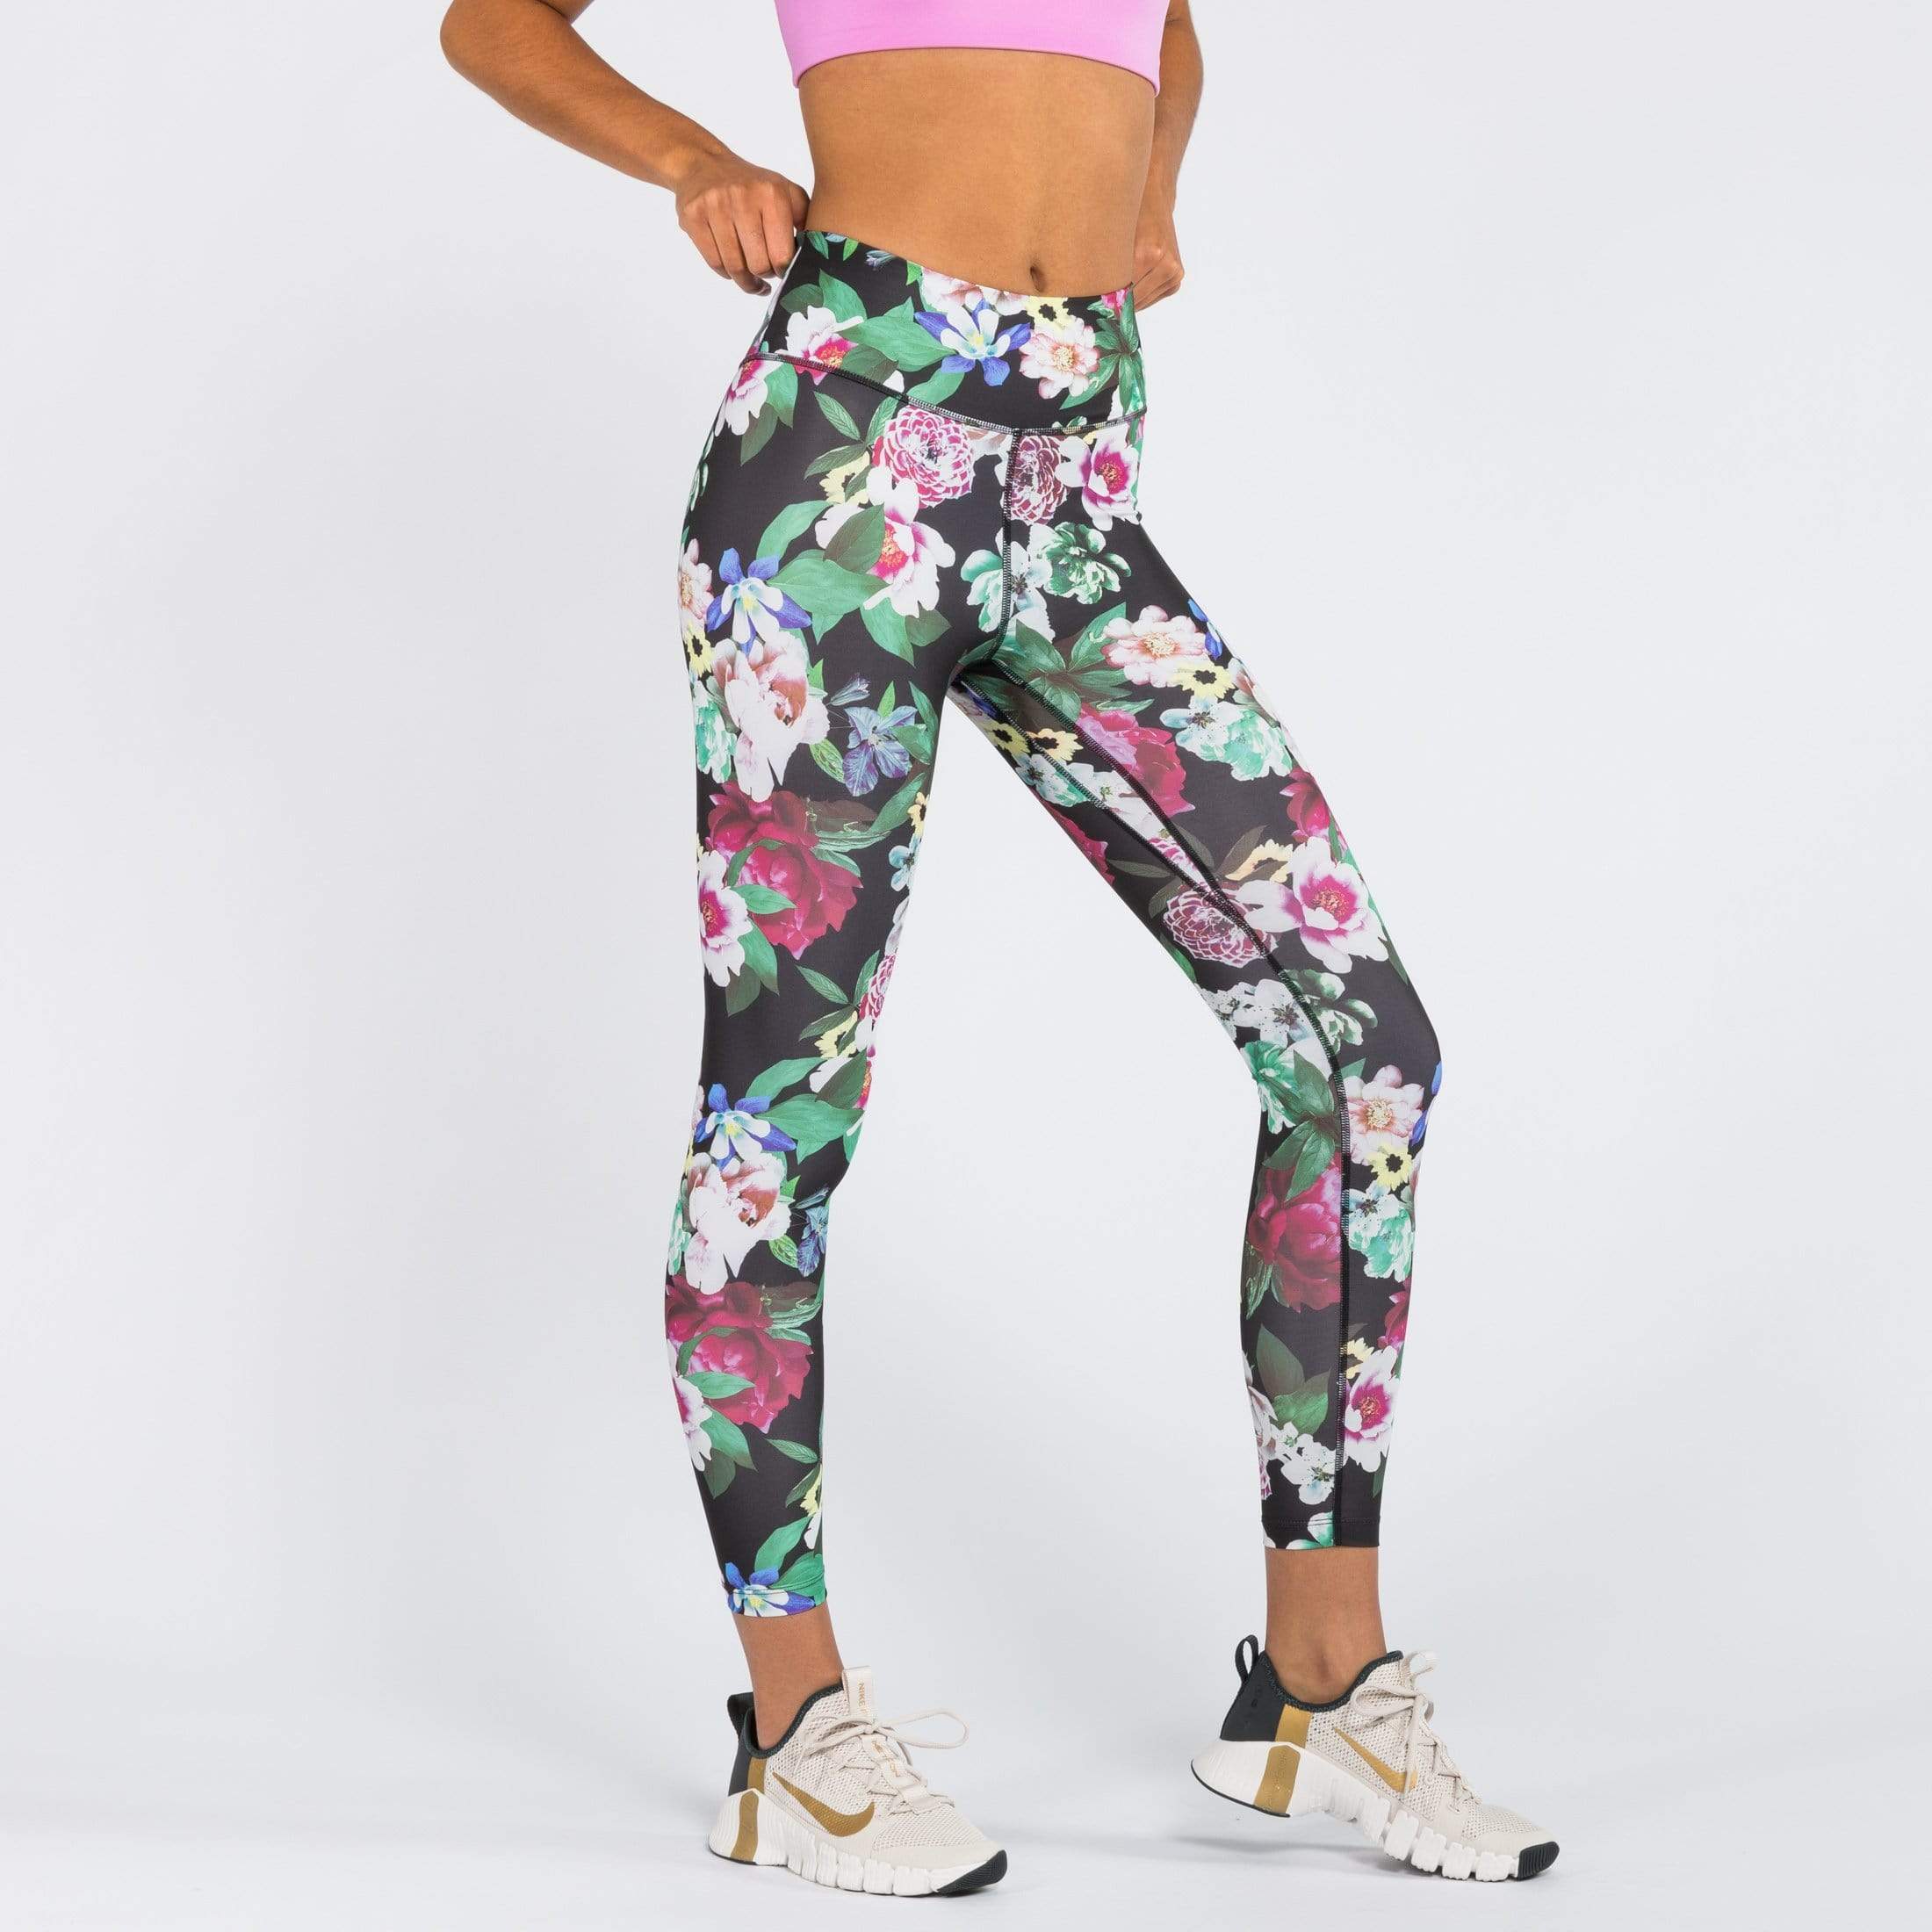 Nike One Floral 7/8 Leggings - WIT Fitness